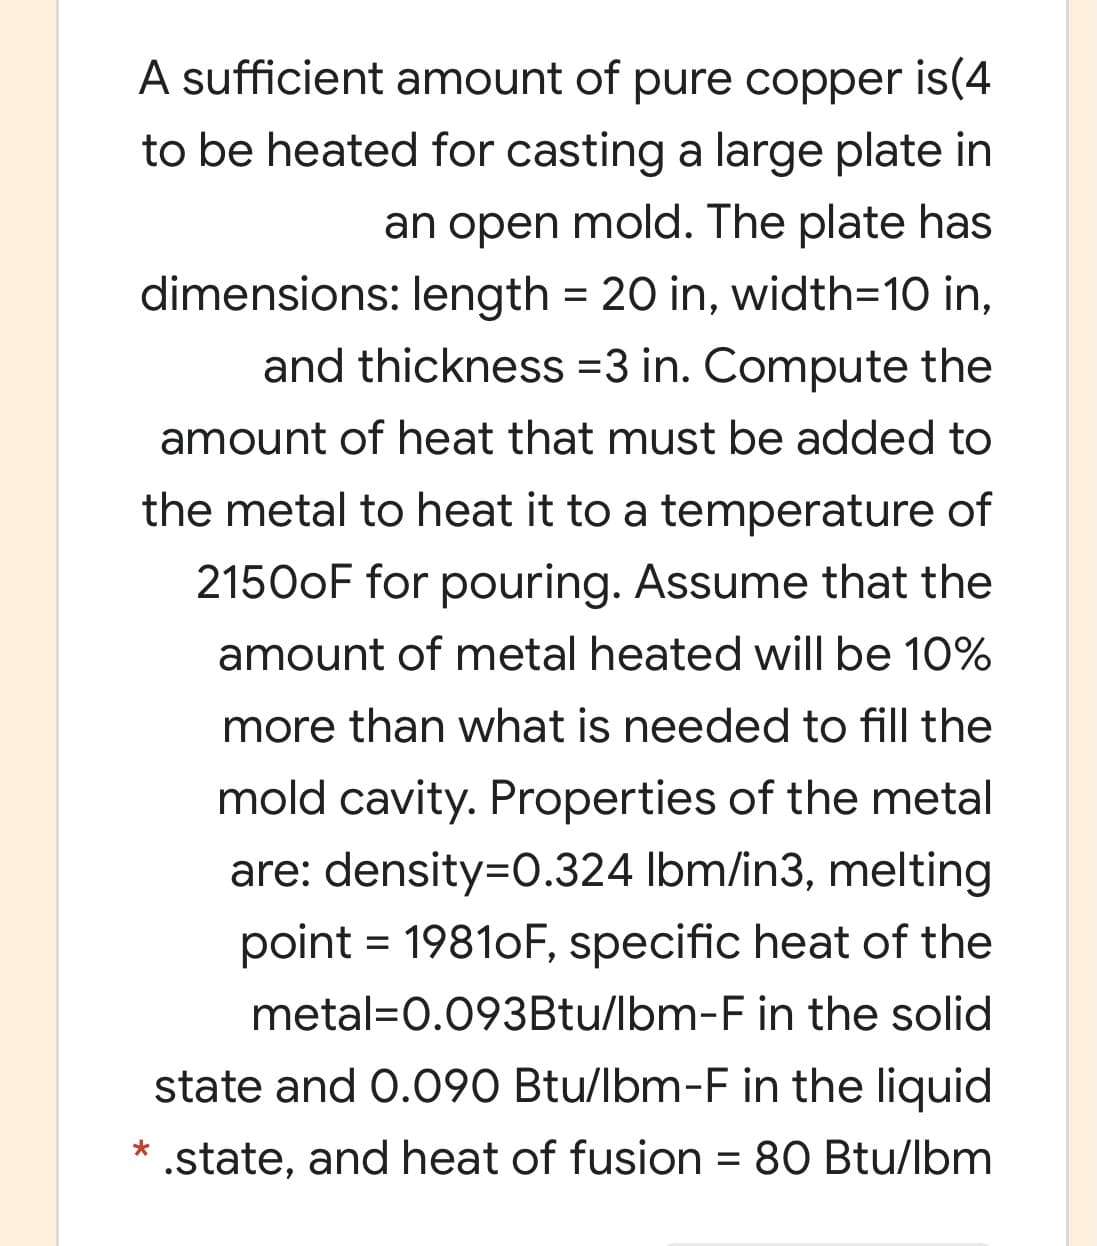 A sufficient amount of pure copper is(4
to be heated for casting a large plate in
an open mold. The plate has
dimensions: length = 20 in, width=D10 in,
and thickness =3 in. Compute the
amount of heat that must be added to
the metal to heat it to a temperature of
21500F for pouring. Assume that the
amount of metal heated will be 10%
more than what is needed to fill the
mold cavity. Properties of the metal
are: density=0.324 Ibm/in3, melting
point = 19810F, specific heat of the
%3D
metal=0.093Btu/lbm-F in the solid
state and 0.090 Btu/lbm-F in the liquid
* .state, and heat of fusion = 80 Btu/lbm
